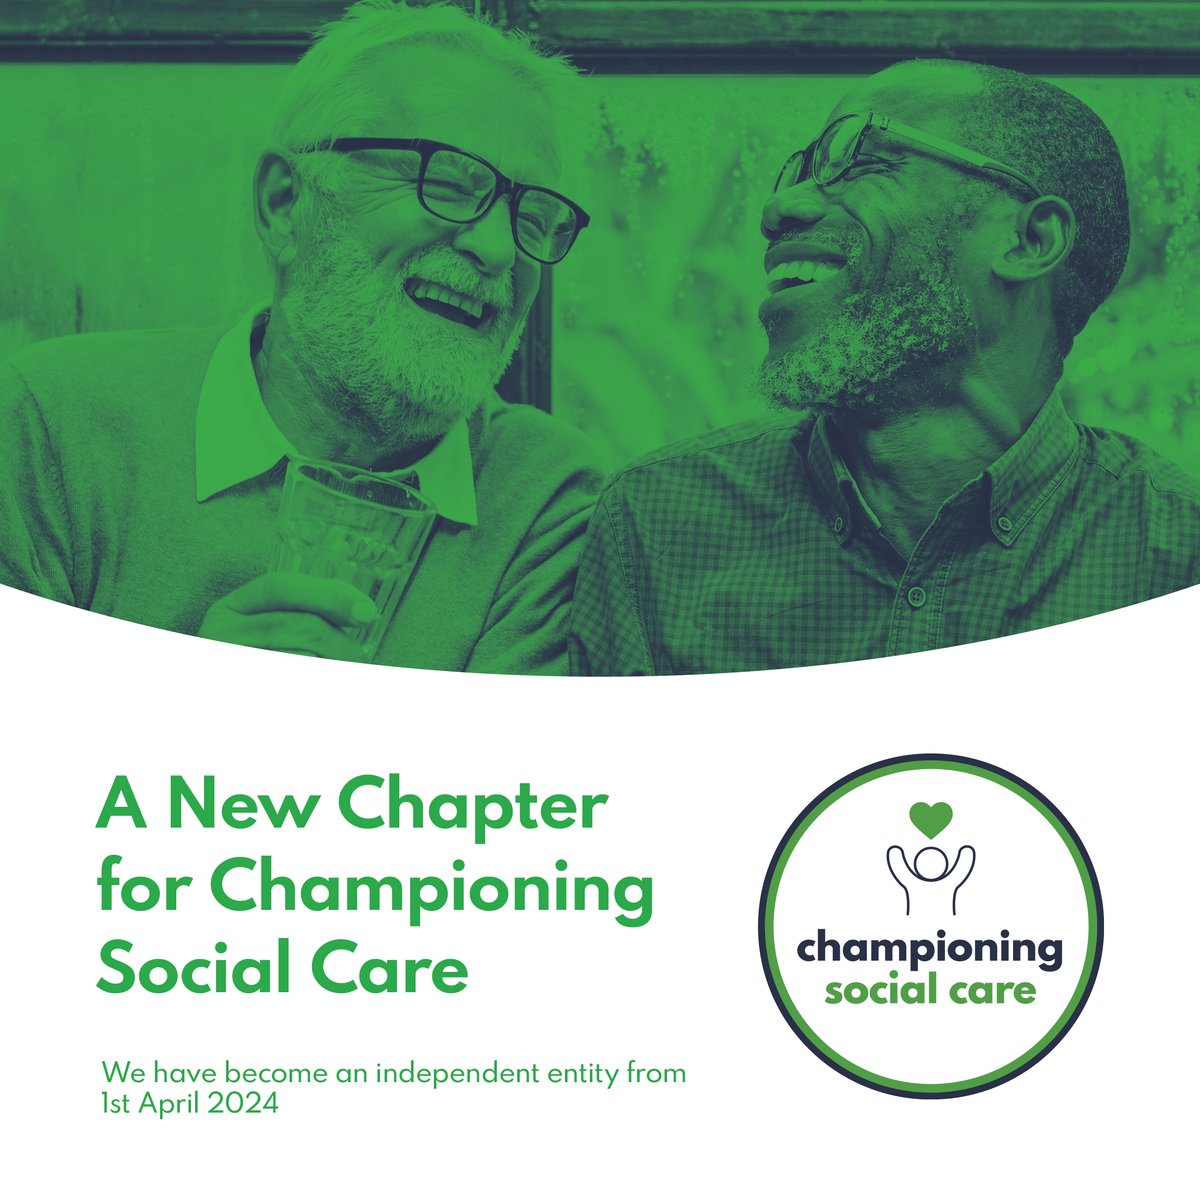 We are delighted to announce that Championing Social Care is embarking on the latest chapter in its work to shine a positive light on social care. From 1st April, we are established as an independent entity. Thank you all for your continued support 💚